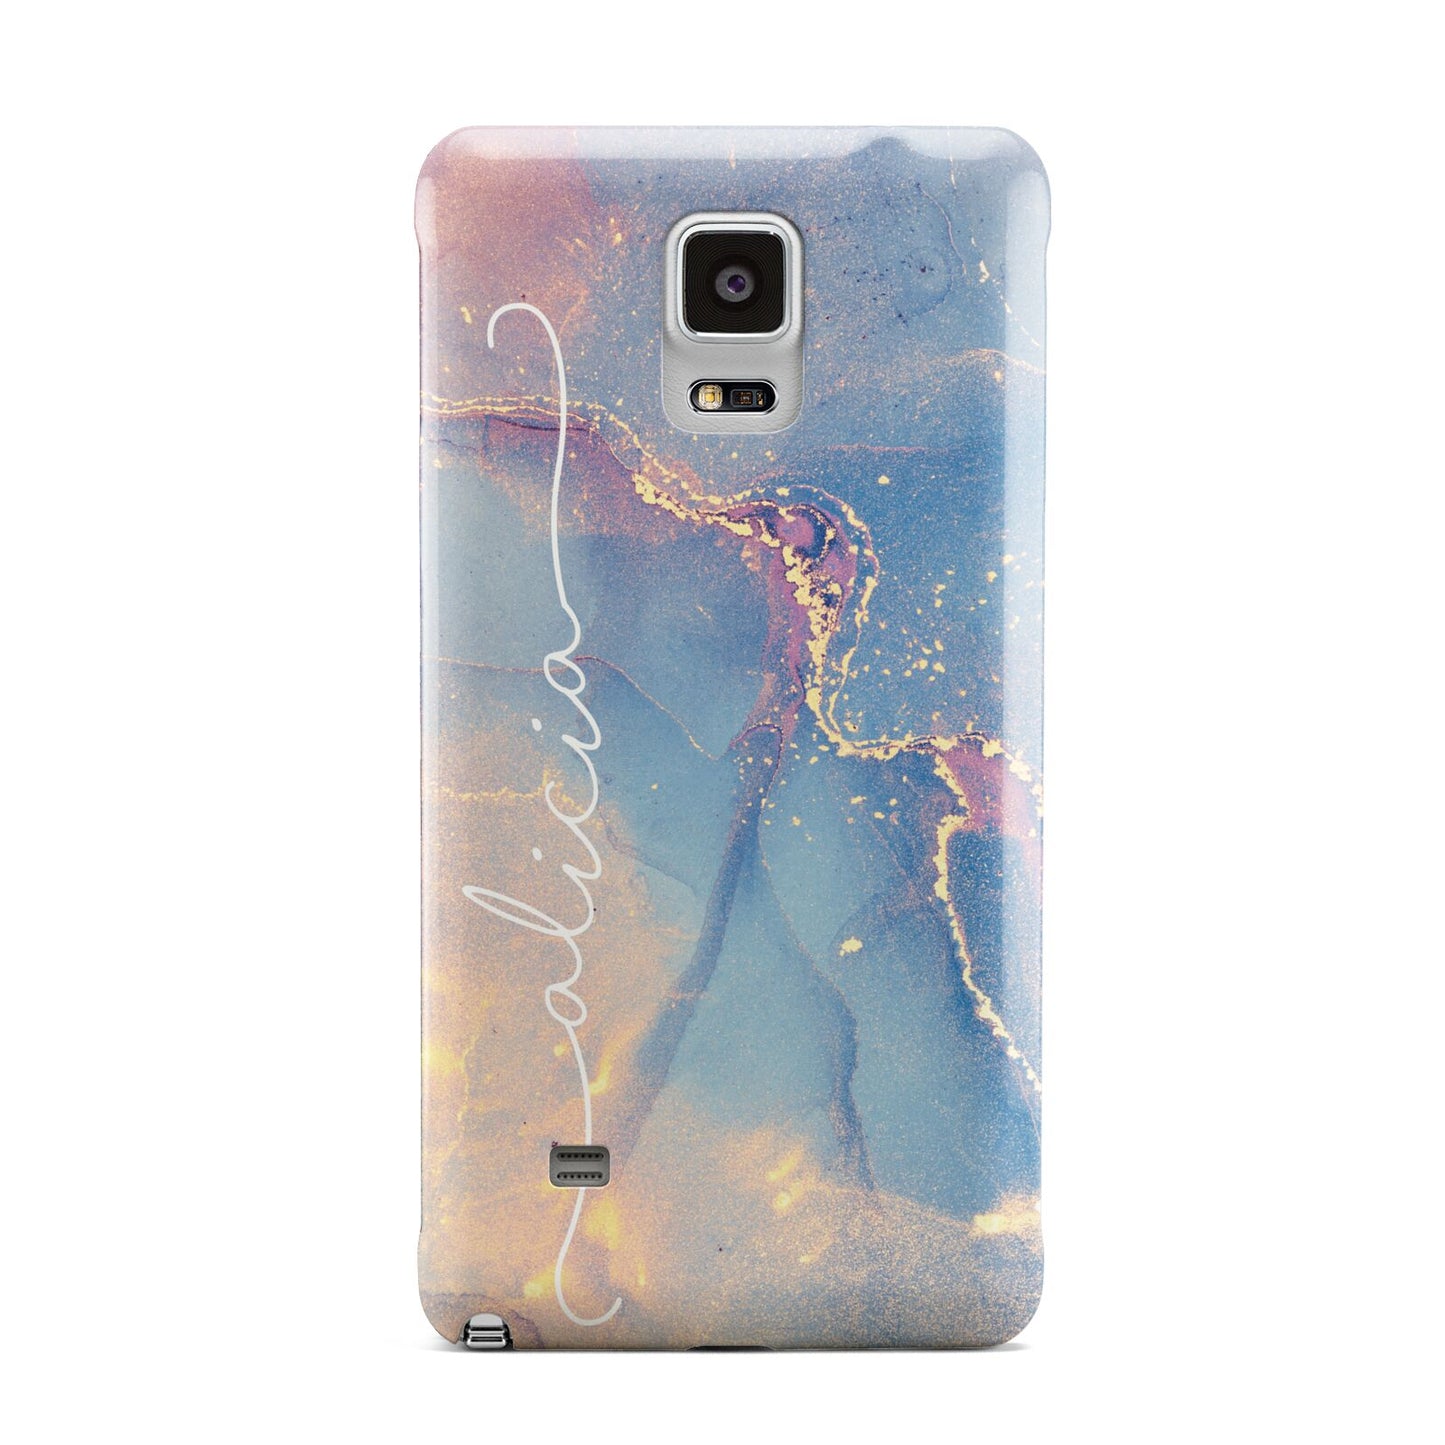 Blue and Pink Marble Samsung Galaxy Note 4 Case